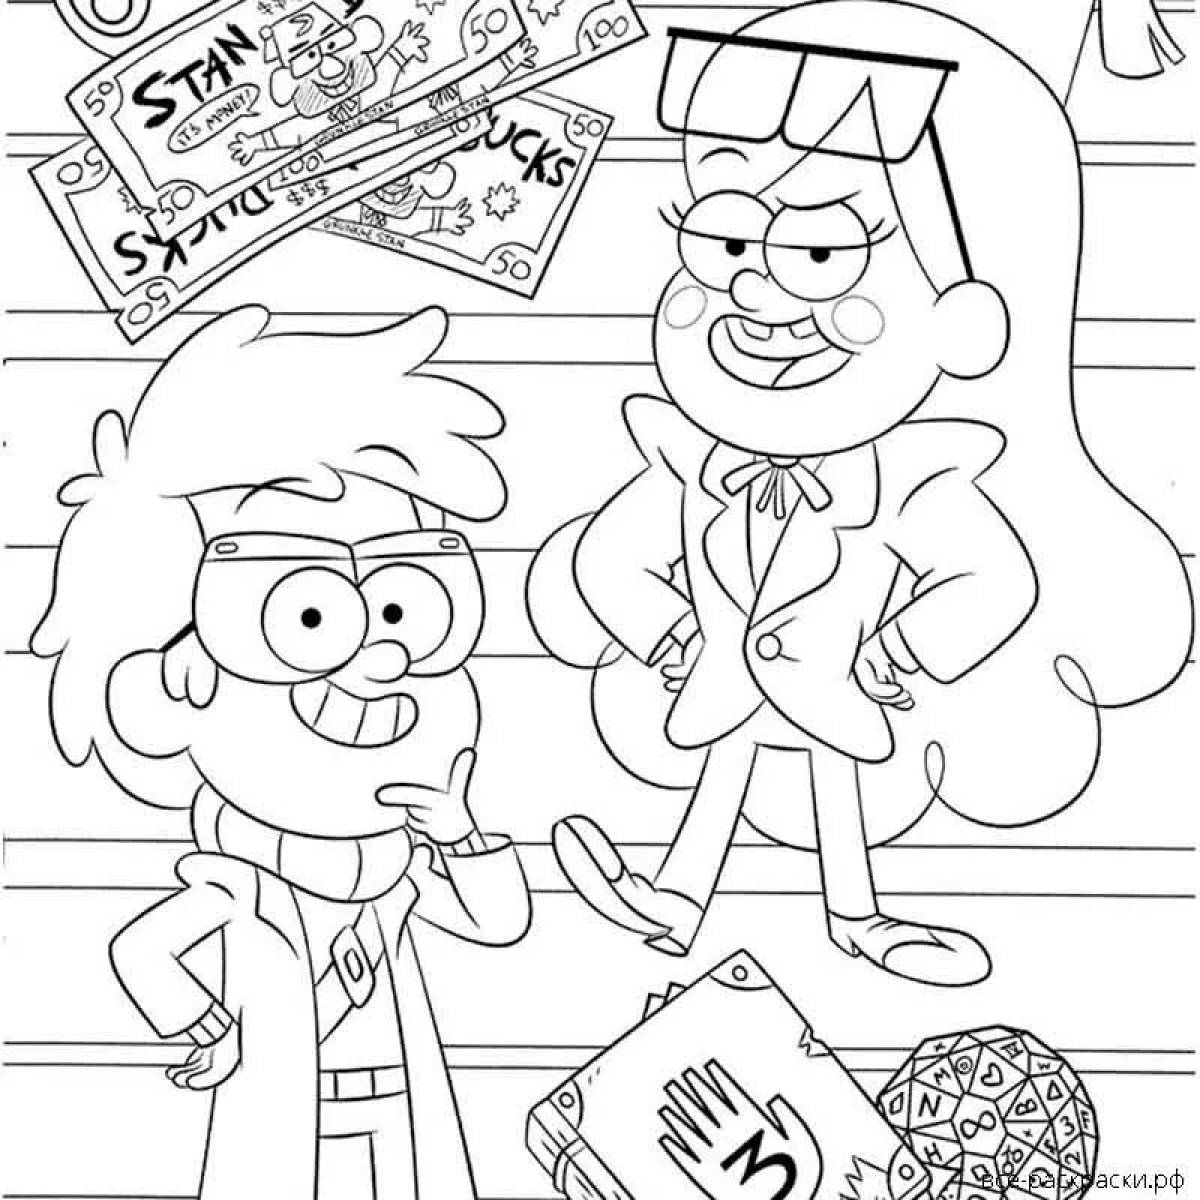 Fabulous dipper and mabel coloring page